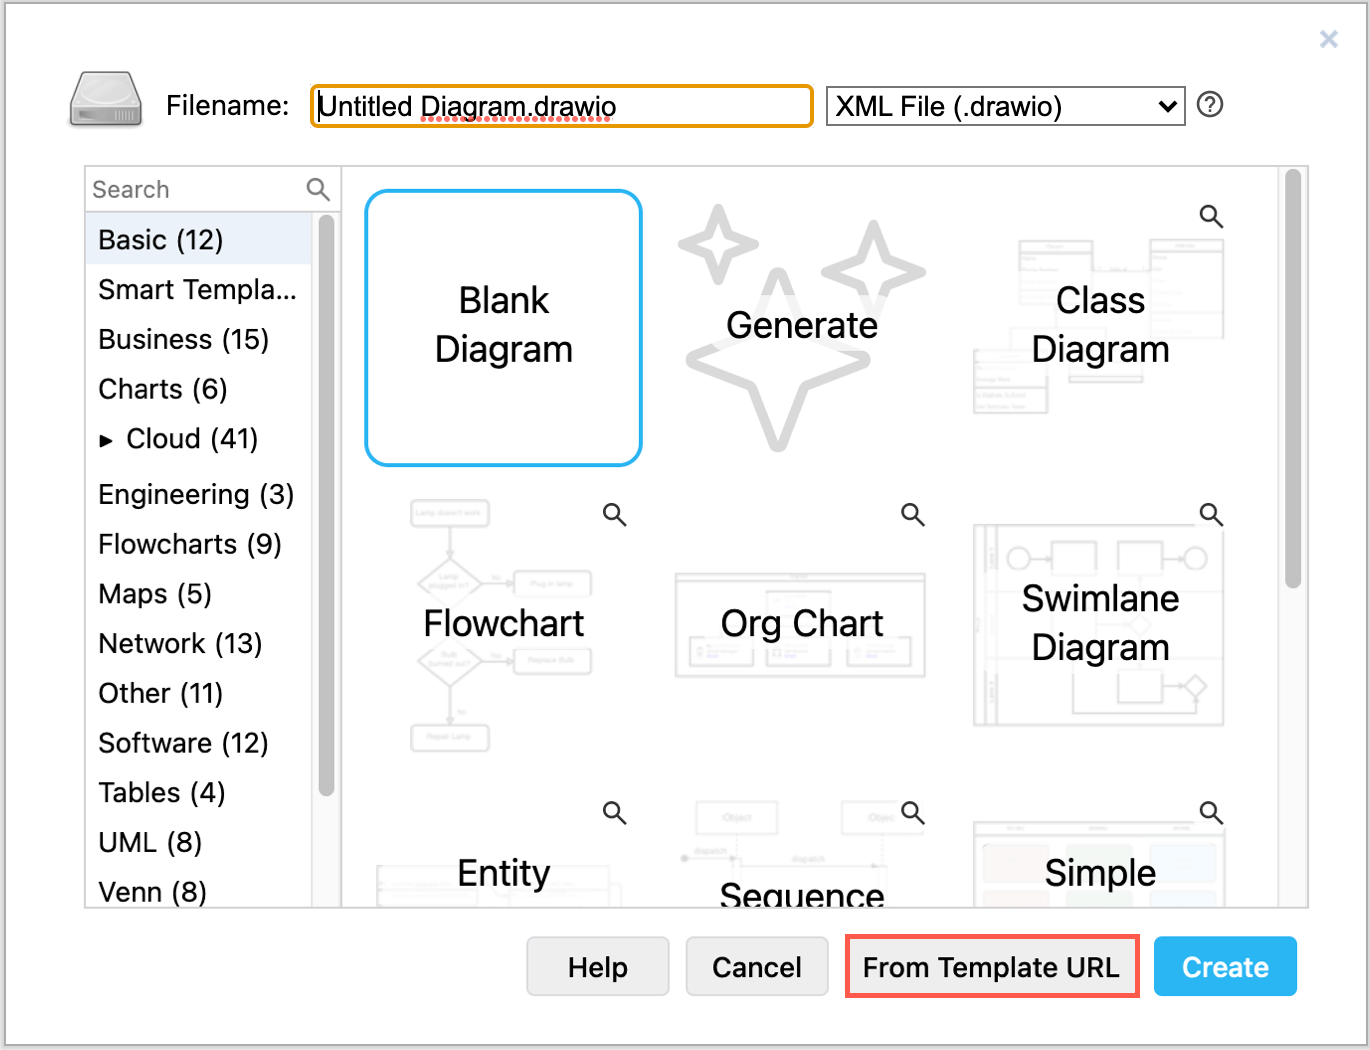 Create a new diagram from a template file using its URL